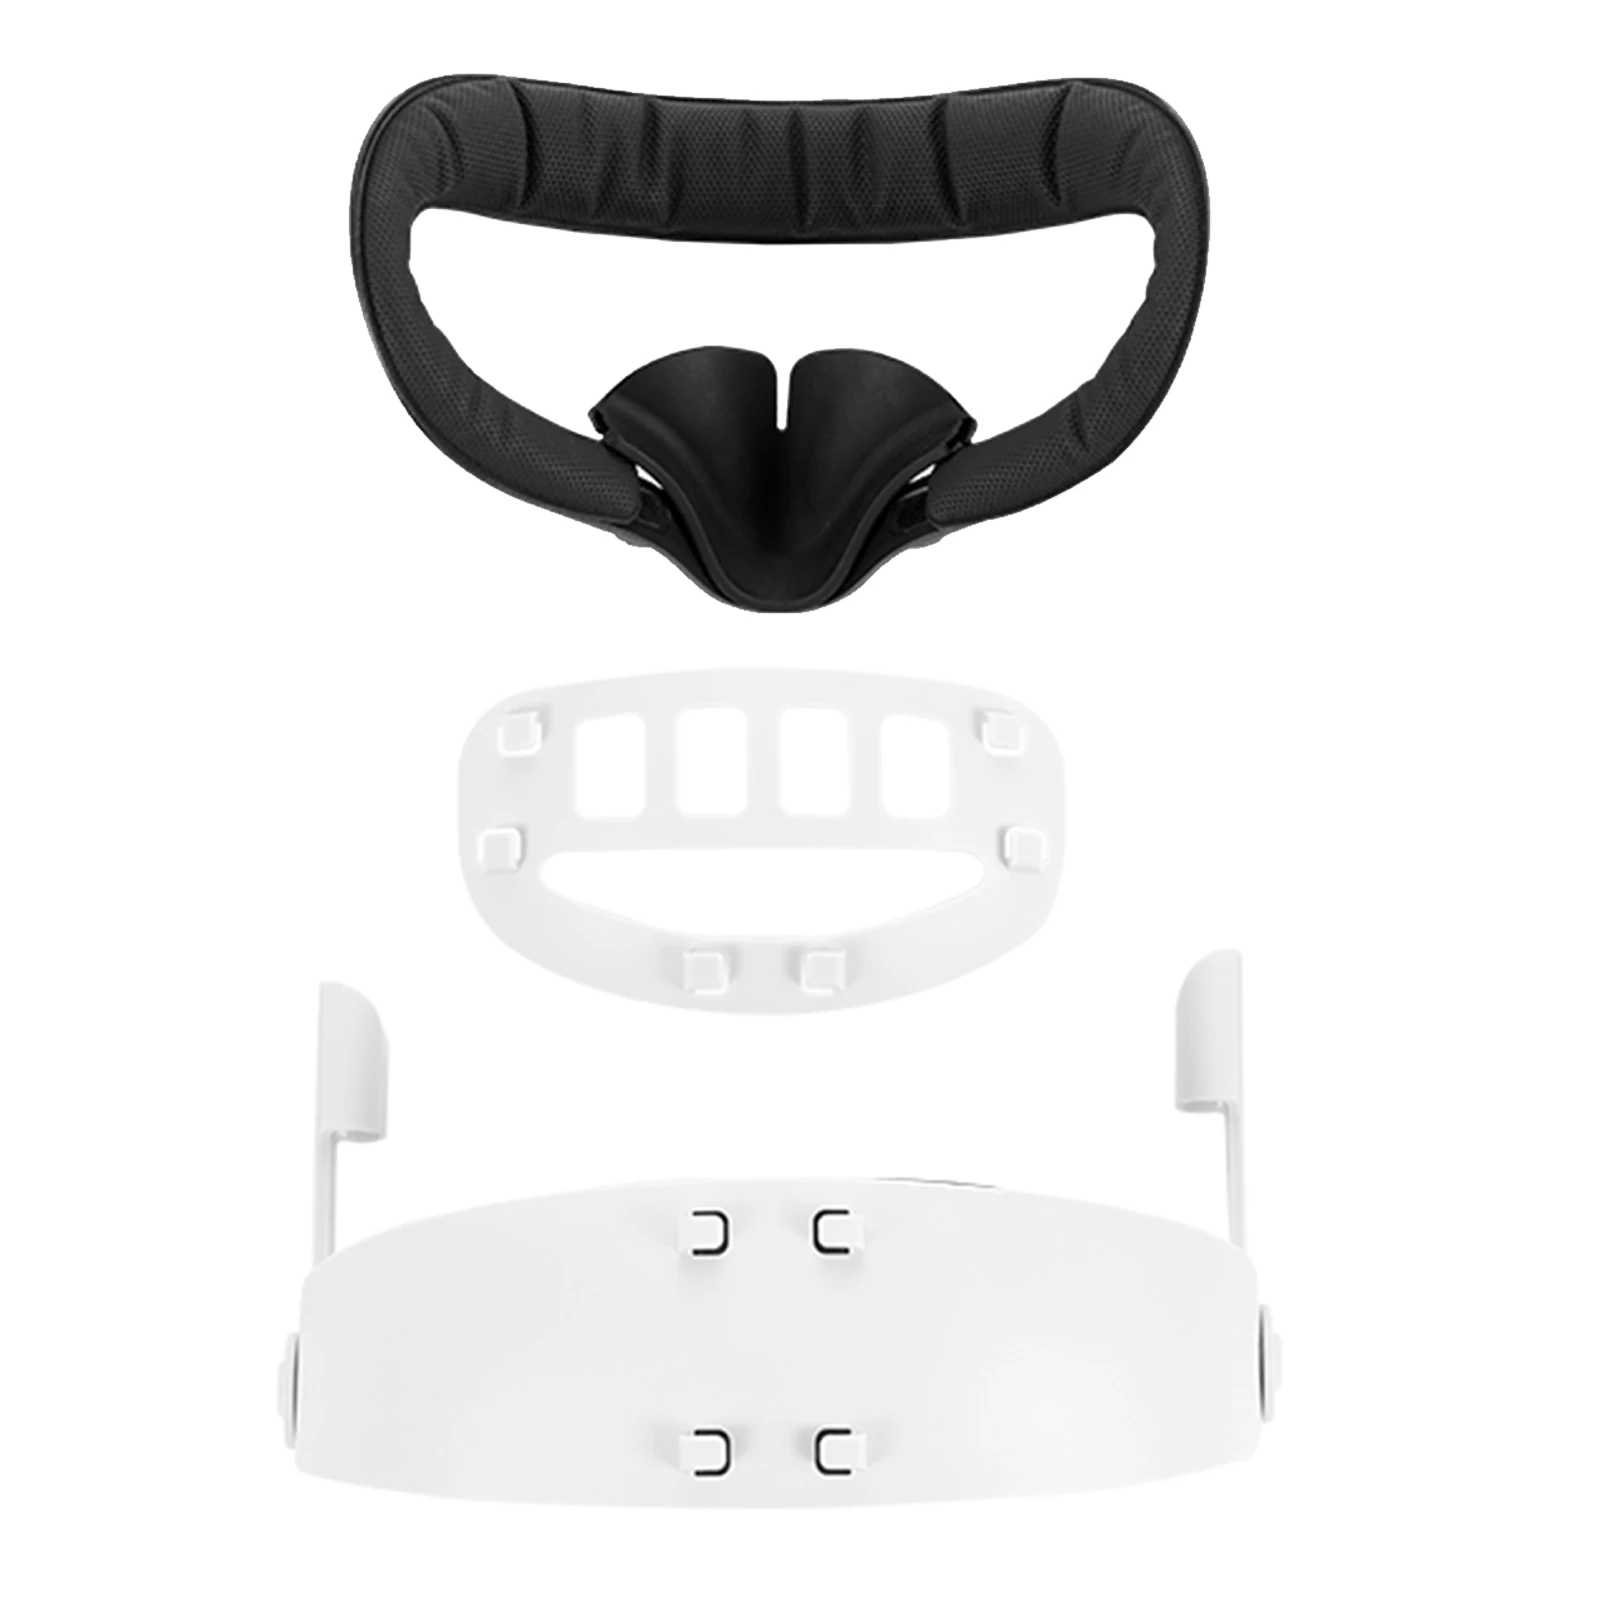 VR Face Pad Silicone Eye Cover Bracket Replaces for Quest 2, Nonslip